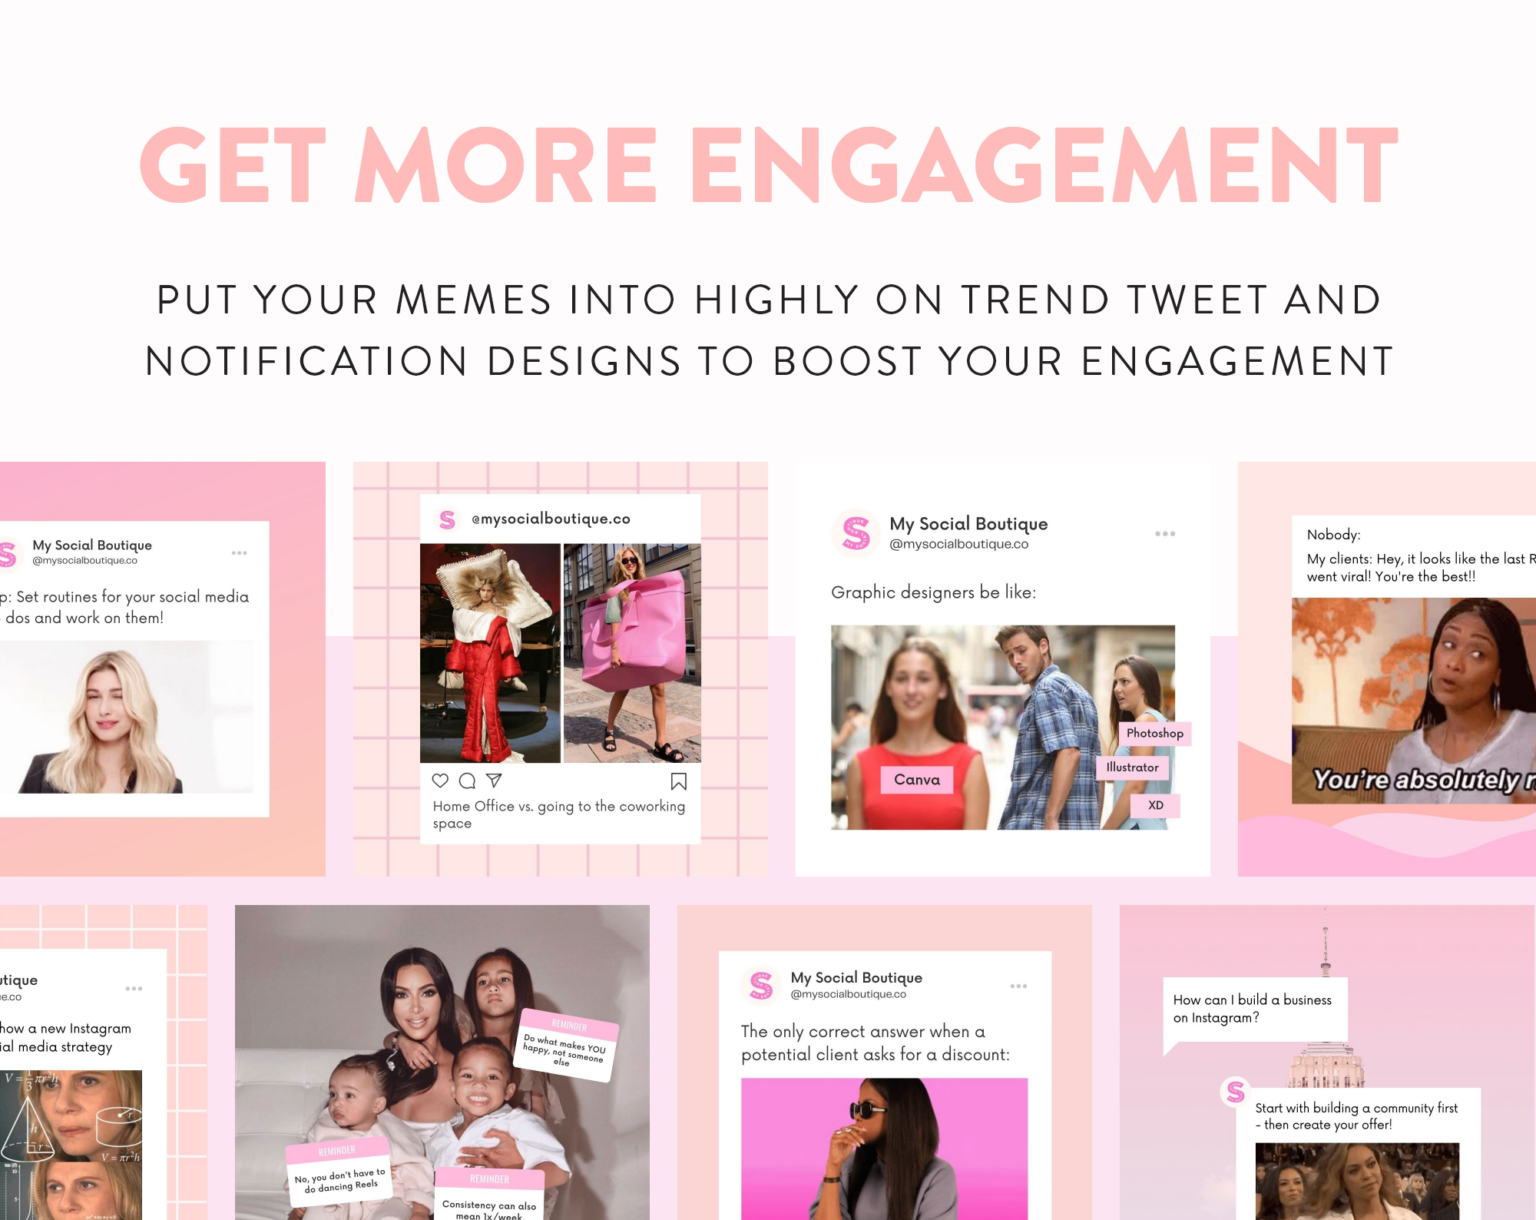 memes-gifs-Instagram-feed-post-templates-canva-engagement-4